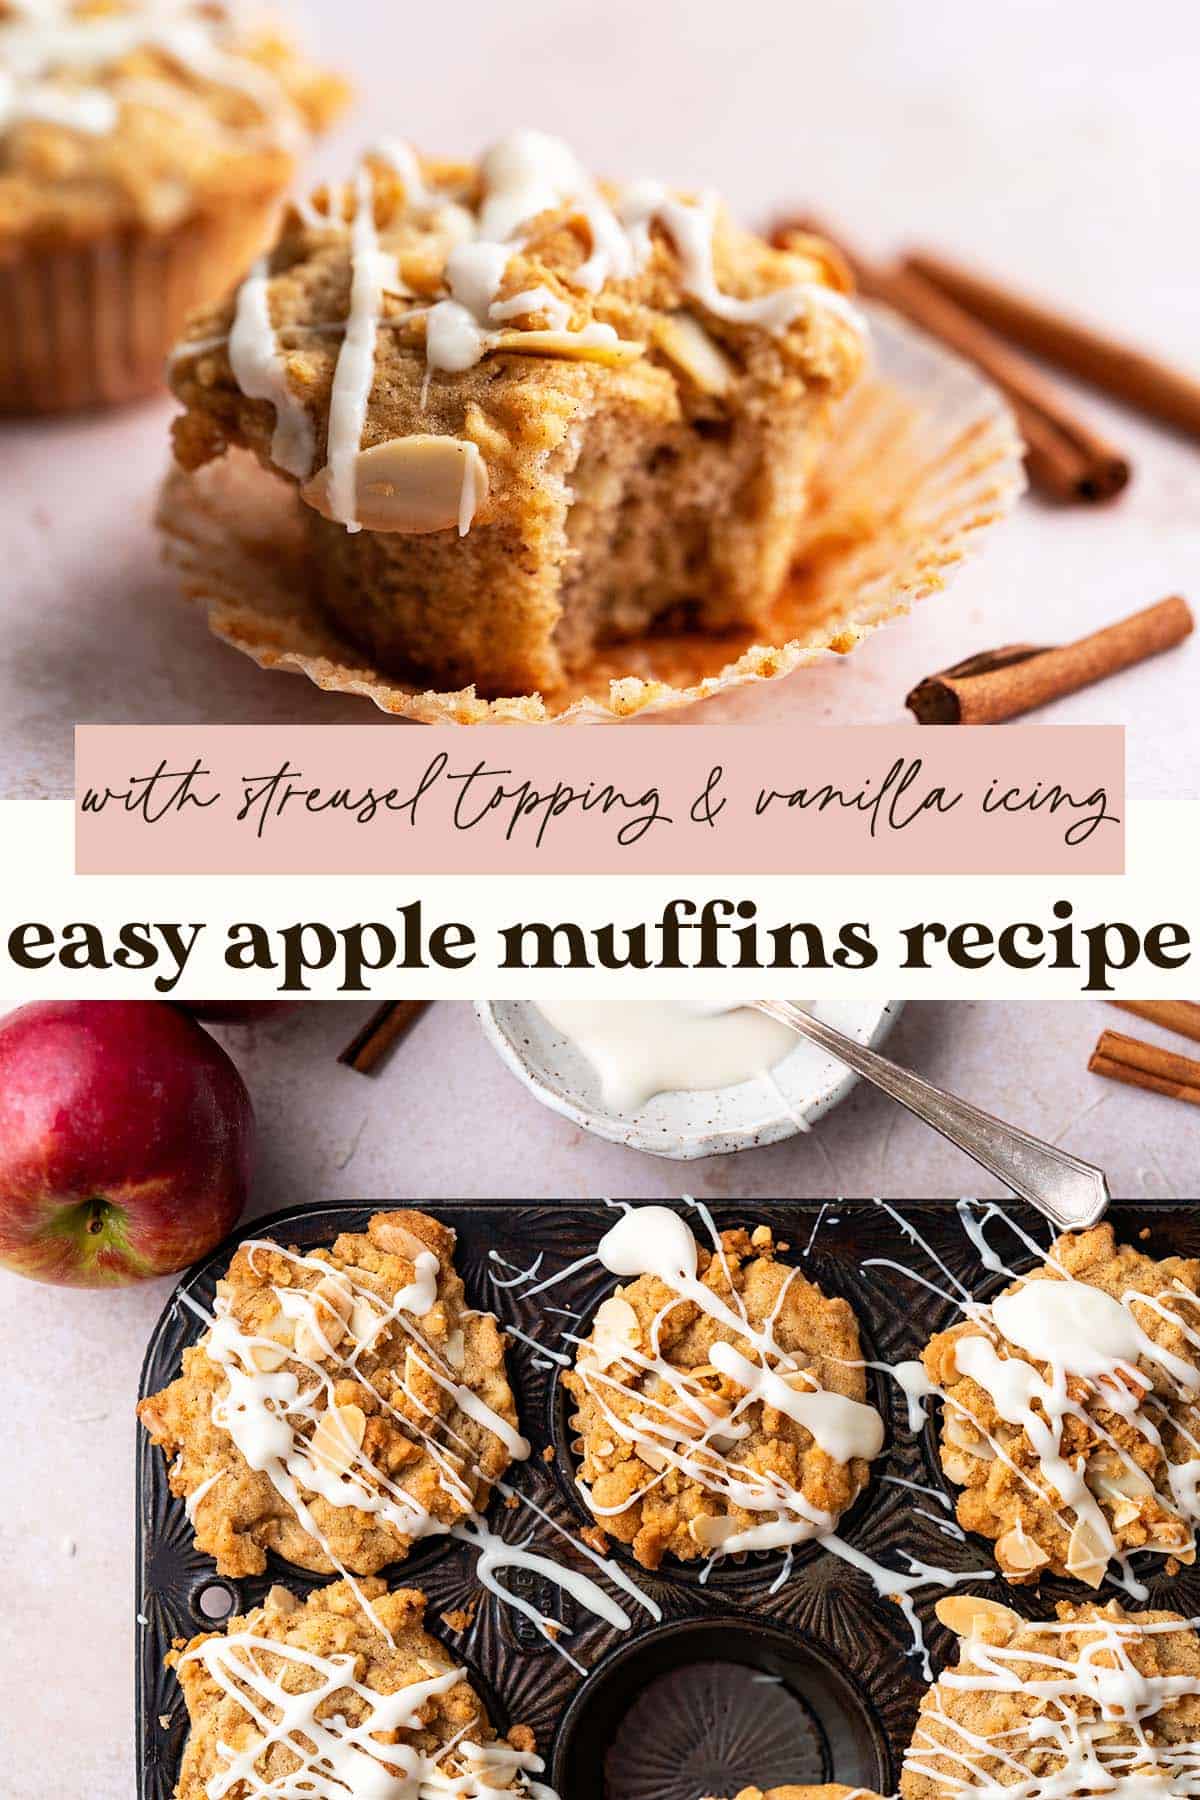 easy apple muffins recipe pin